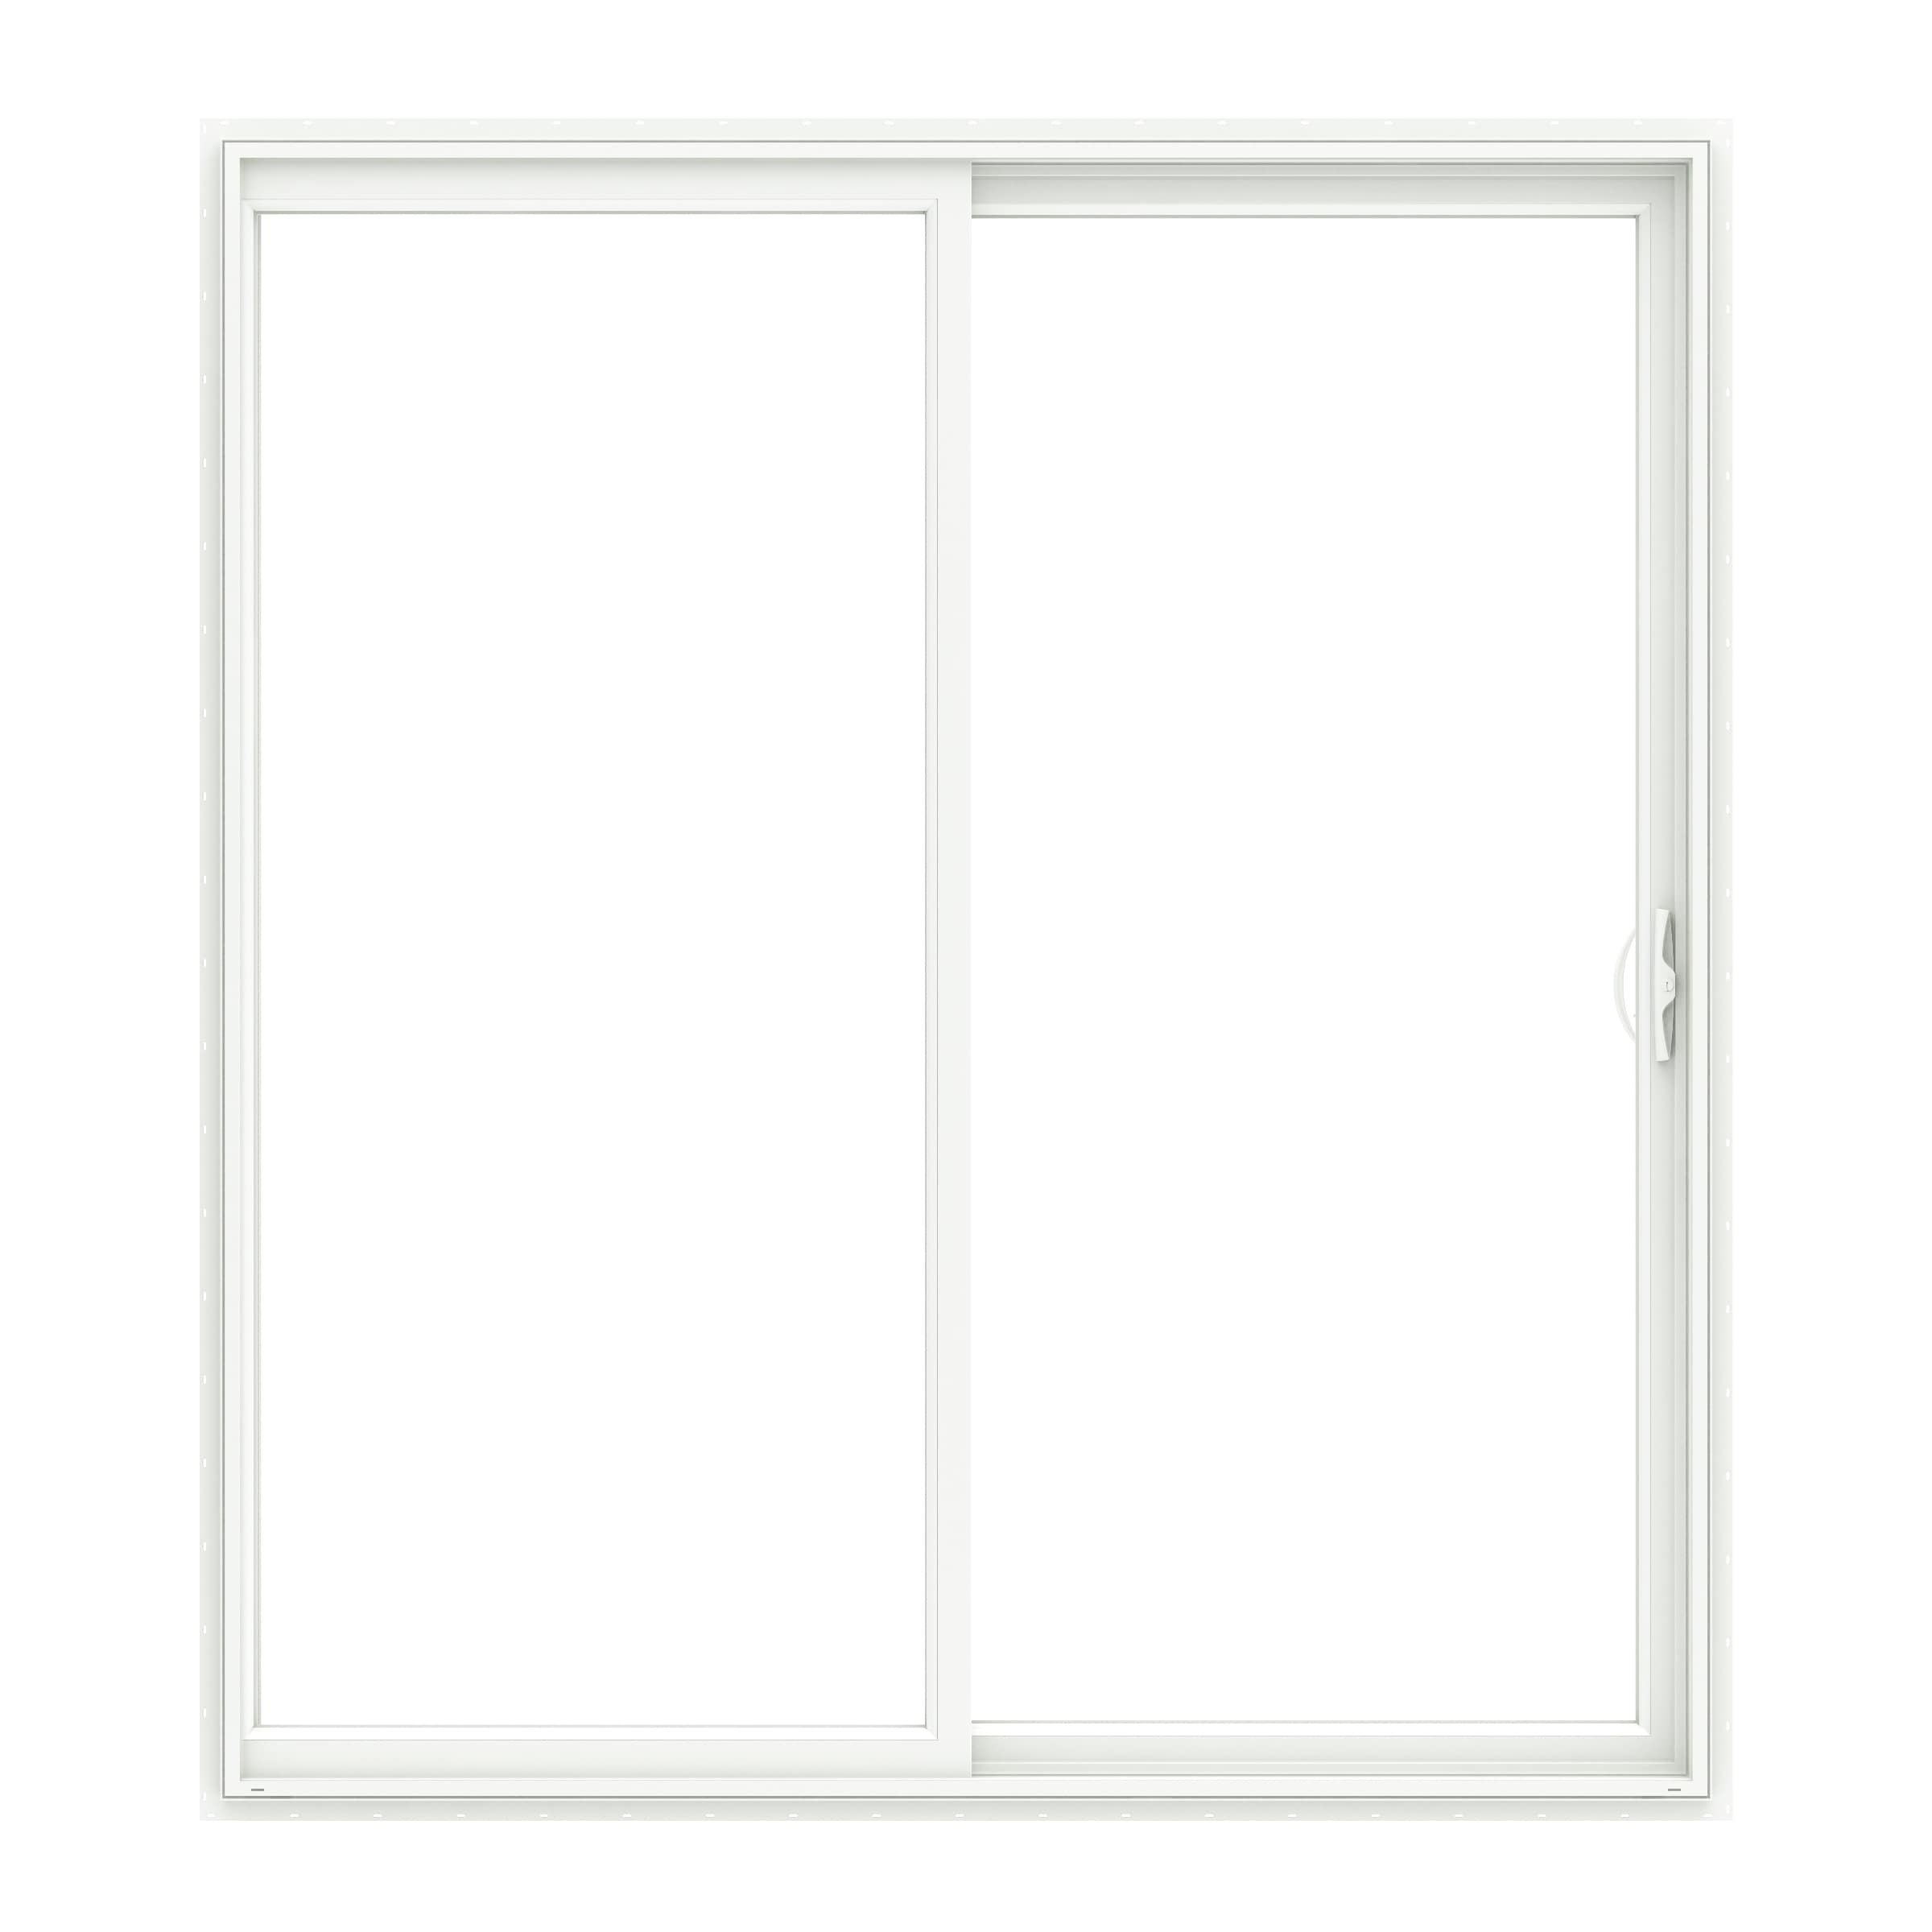 Sliding 72-in x 96-in Patio Doors at Lowes.com